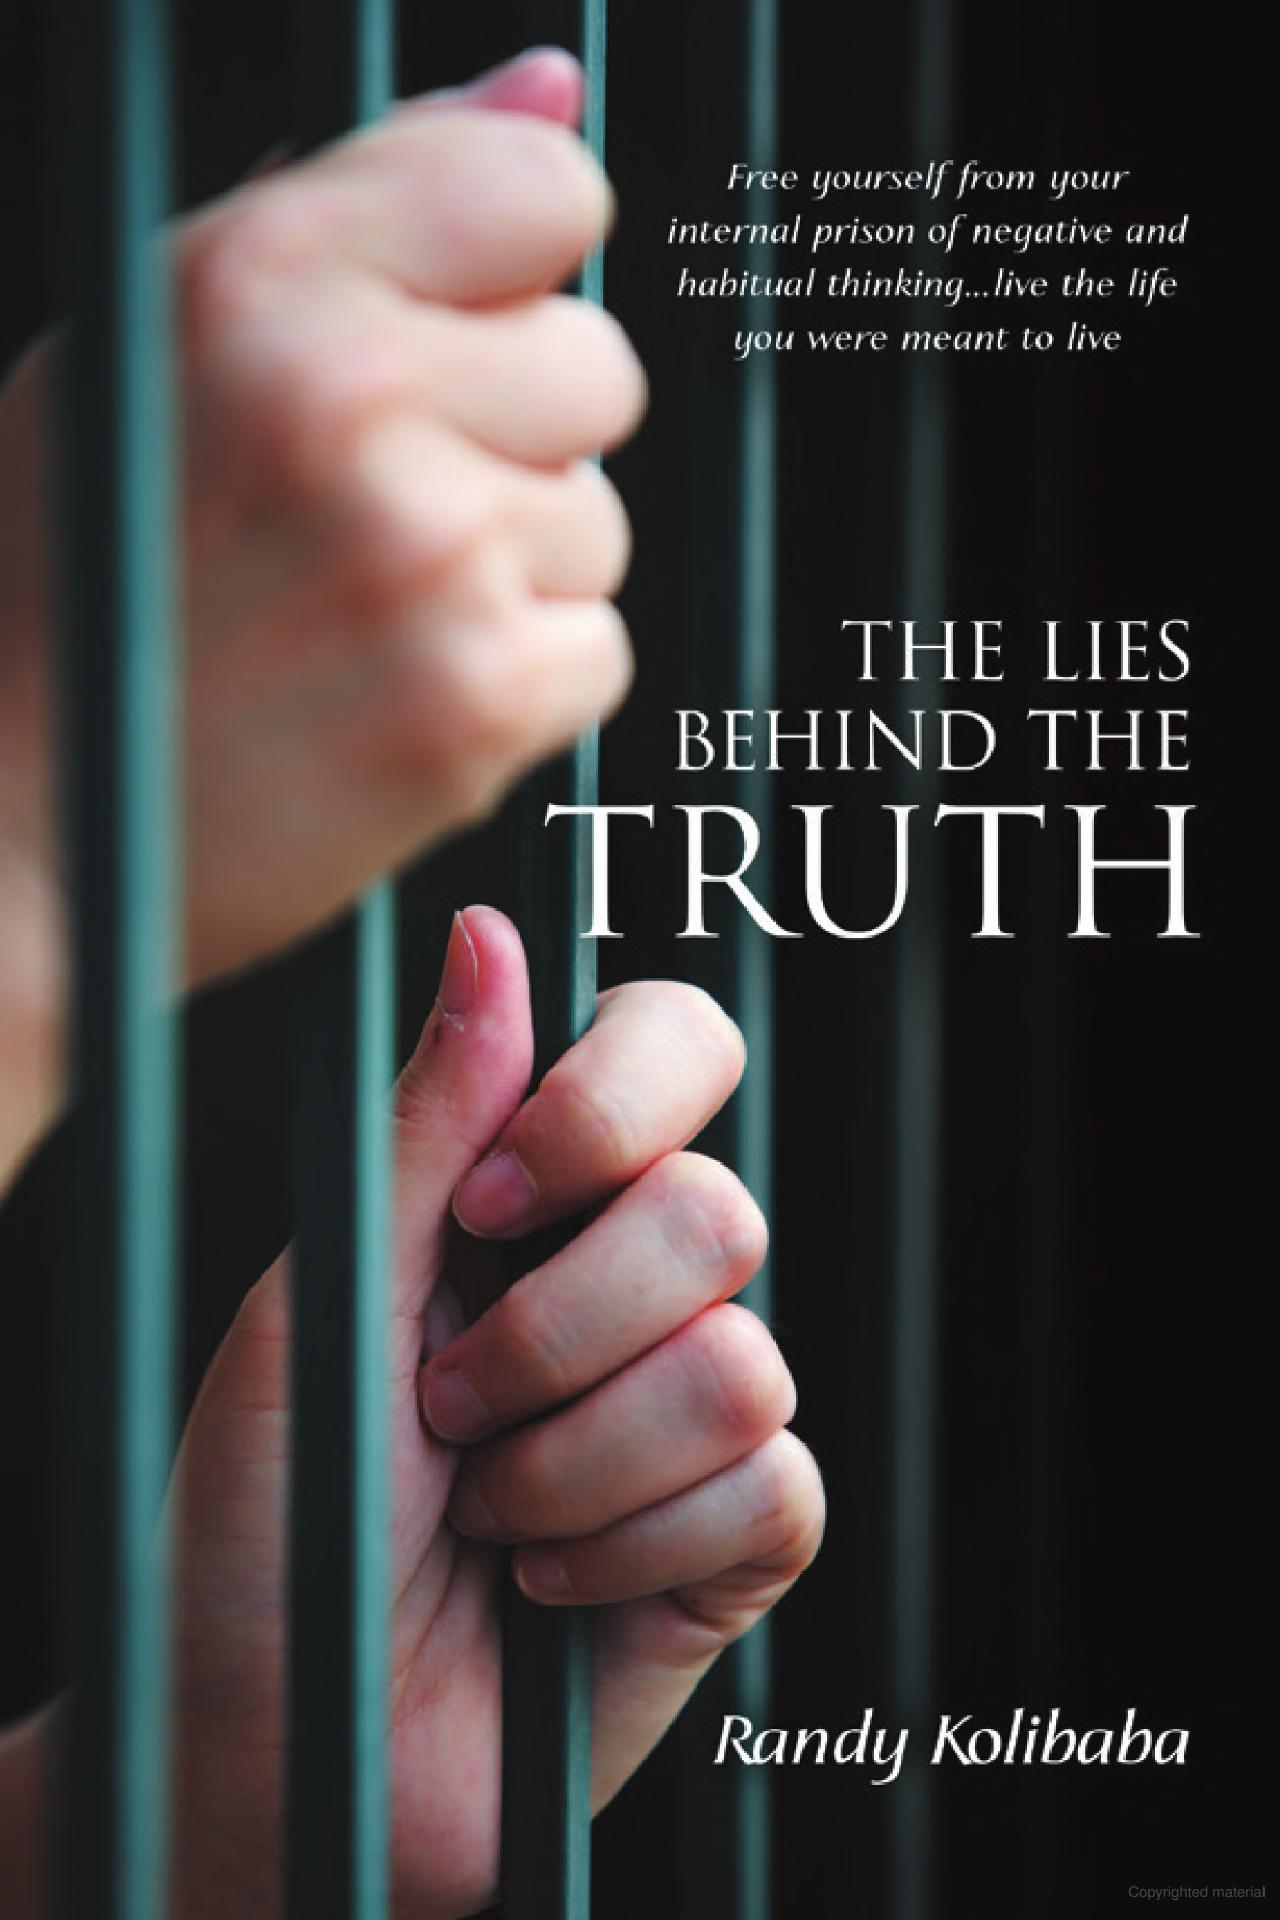 The Lies behind the Truth